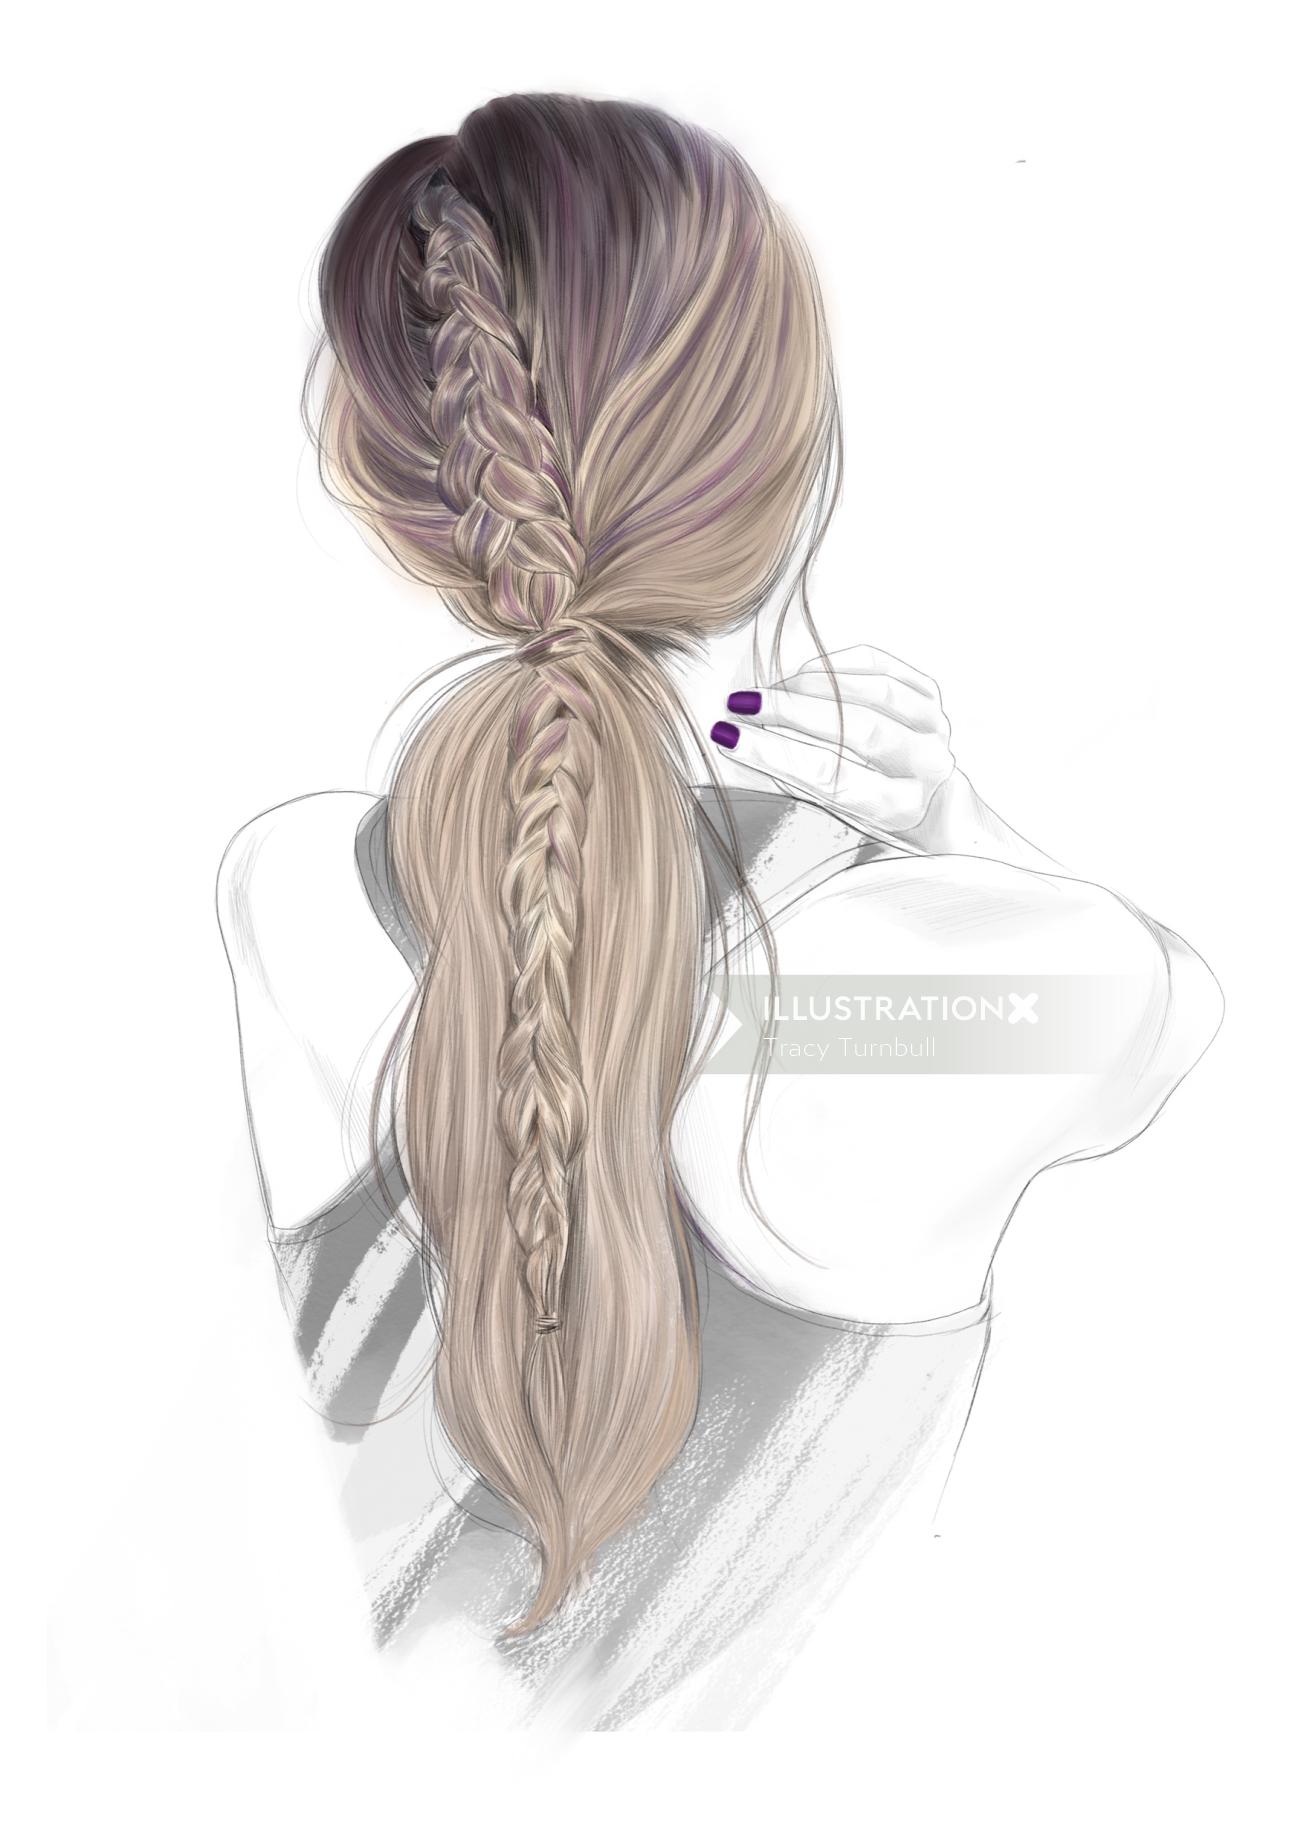 Hair colour | Illustration by Tracy Turnbull